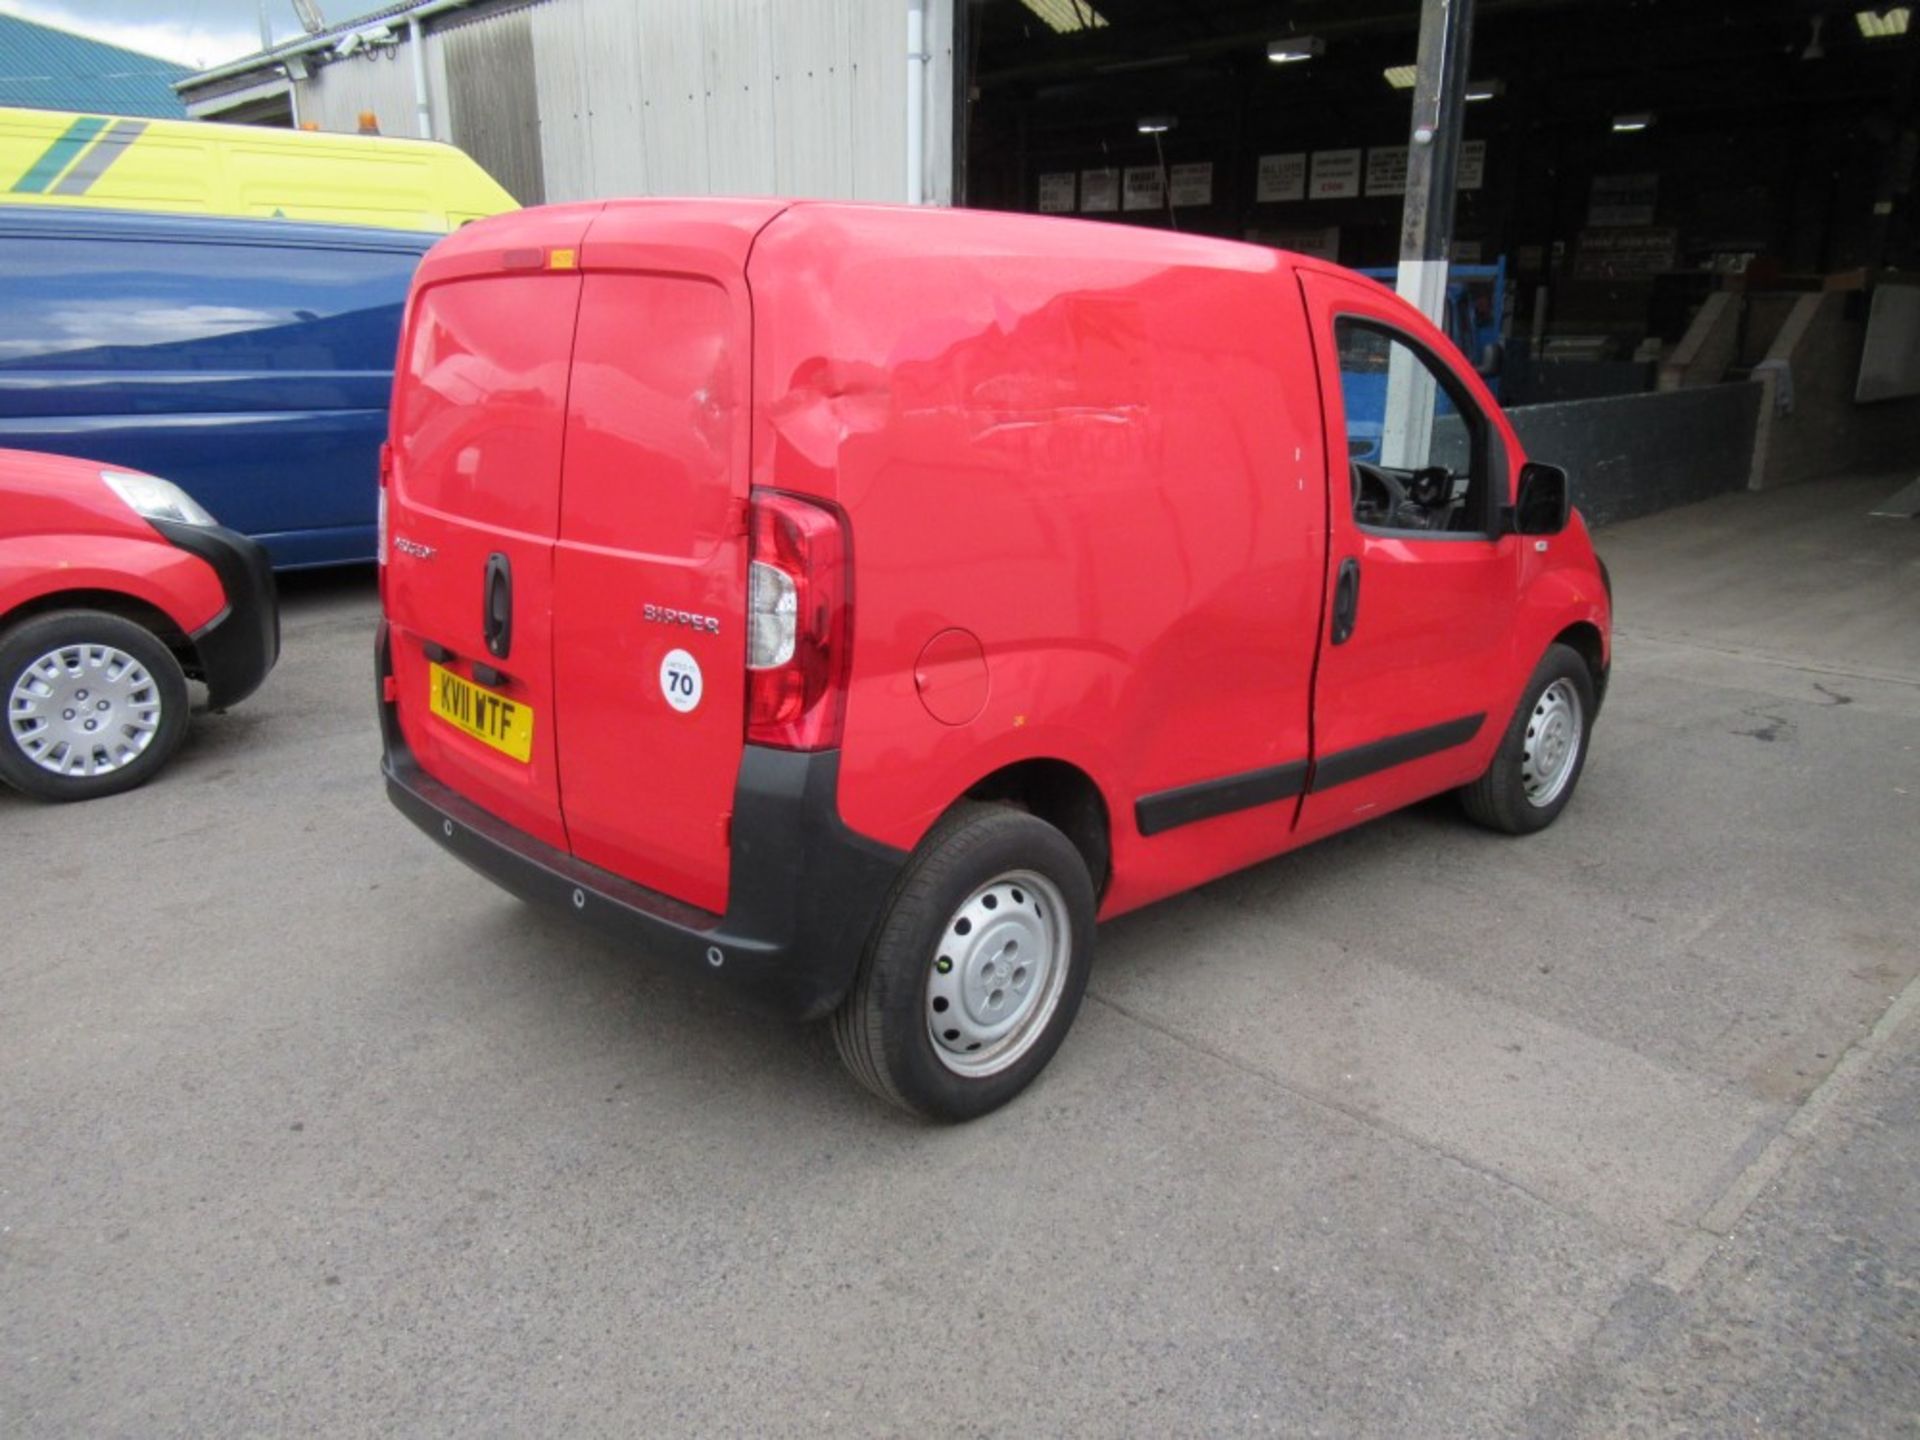 11 reg PEUGEOT BIPPER S HDI, 1ST REG 03/11, TEST 02/20, 54277M WARRANTED, V5 HERE, 1 OWNER FROM - Image 4 of 5